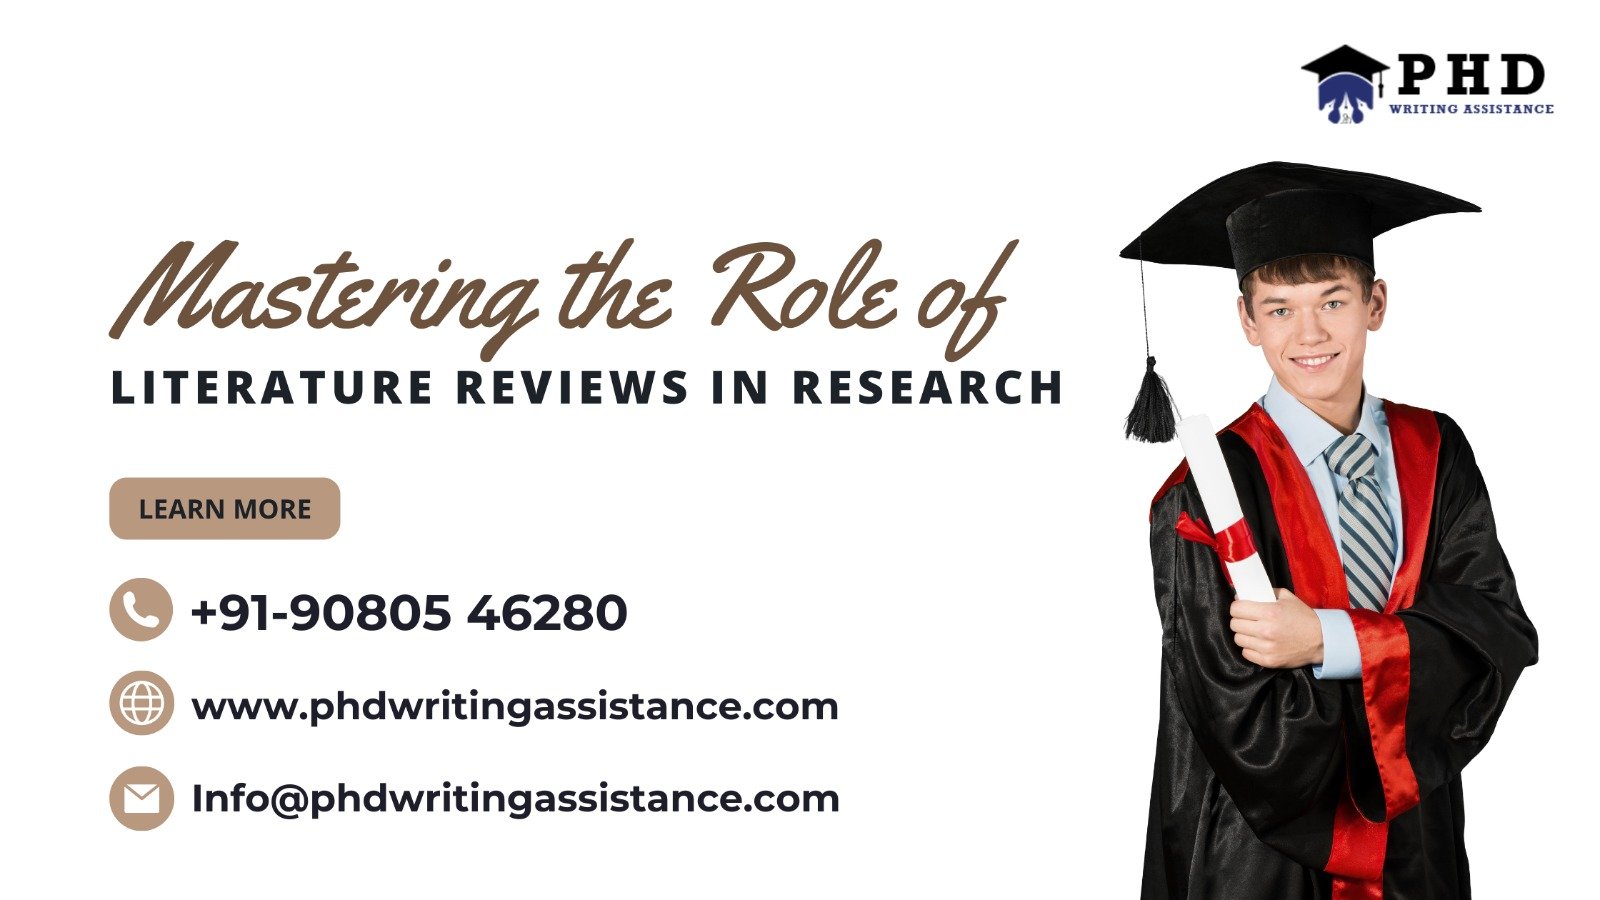 Mastering the Role of Literature Reviews in Research